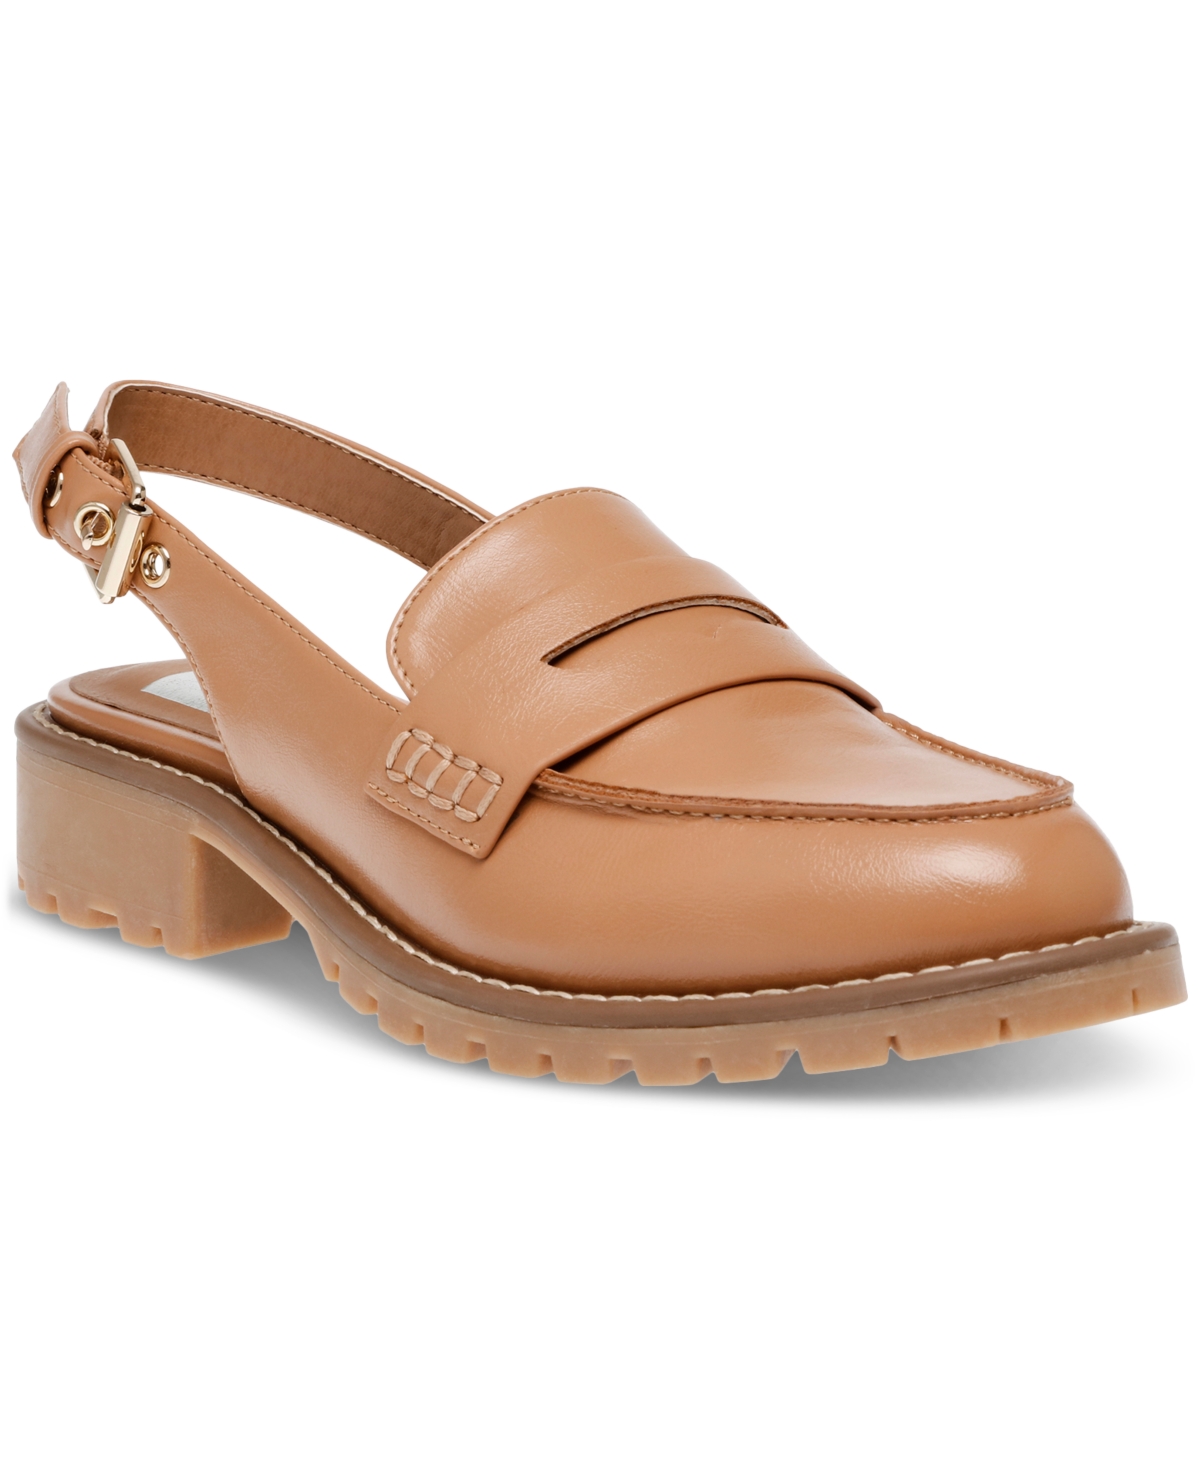 Women's Cabo Slingback Tailored Loafers - Tan